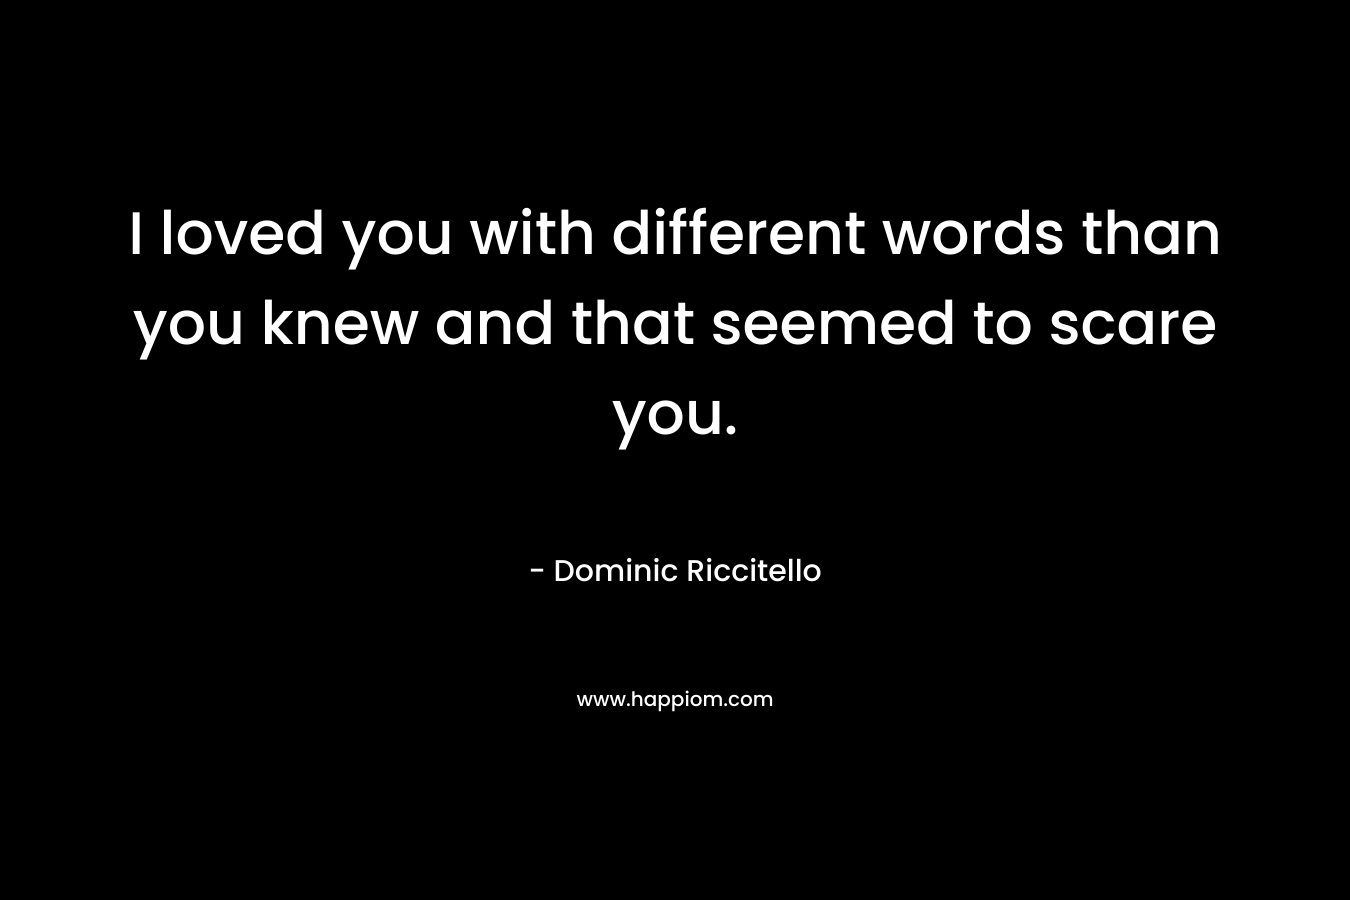 I loved you with different words than you knew and that seemed to scare you. – Dominic Riccitello